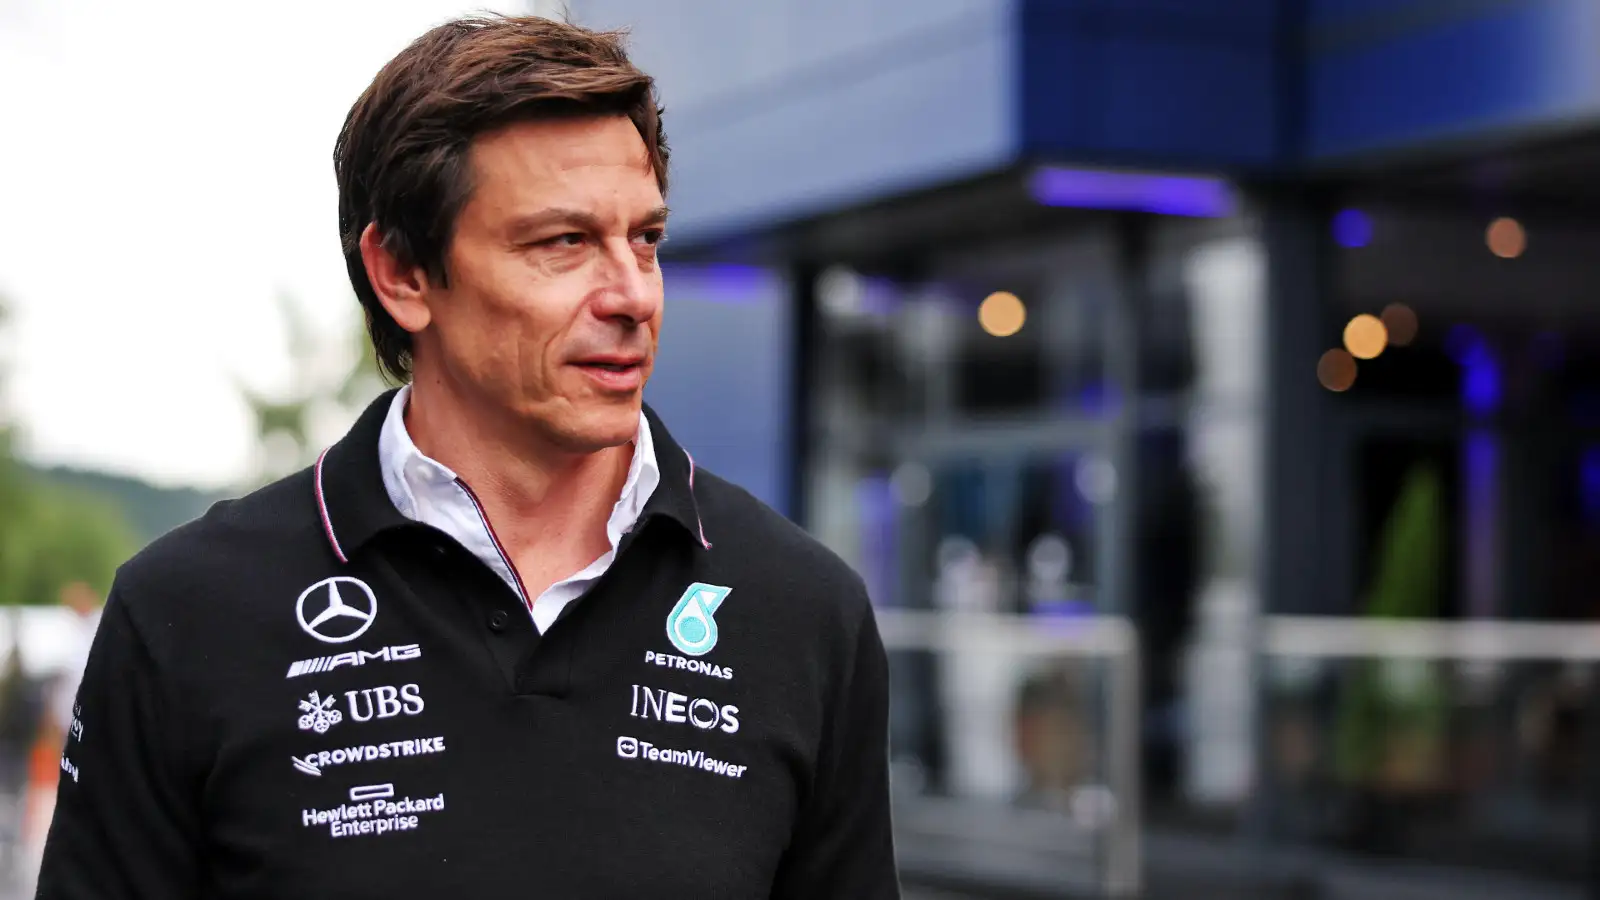 Mercedes team boss Toto Wolff smiling in the paddock.